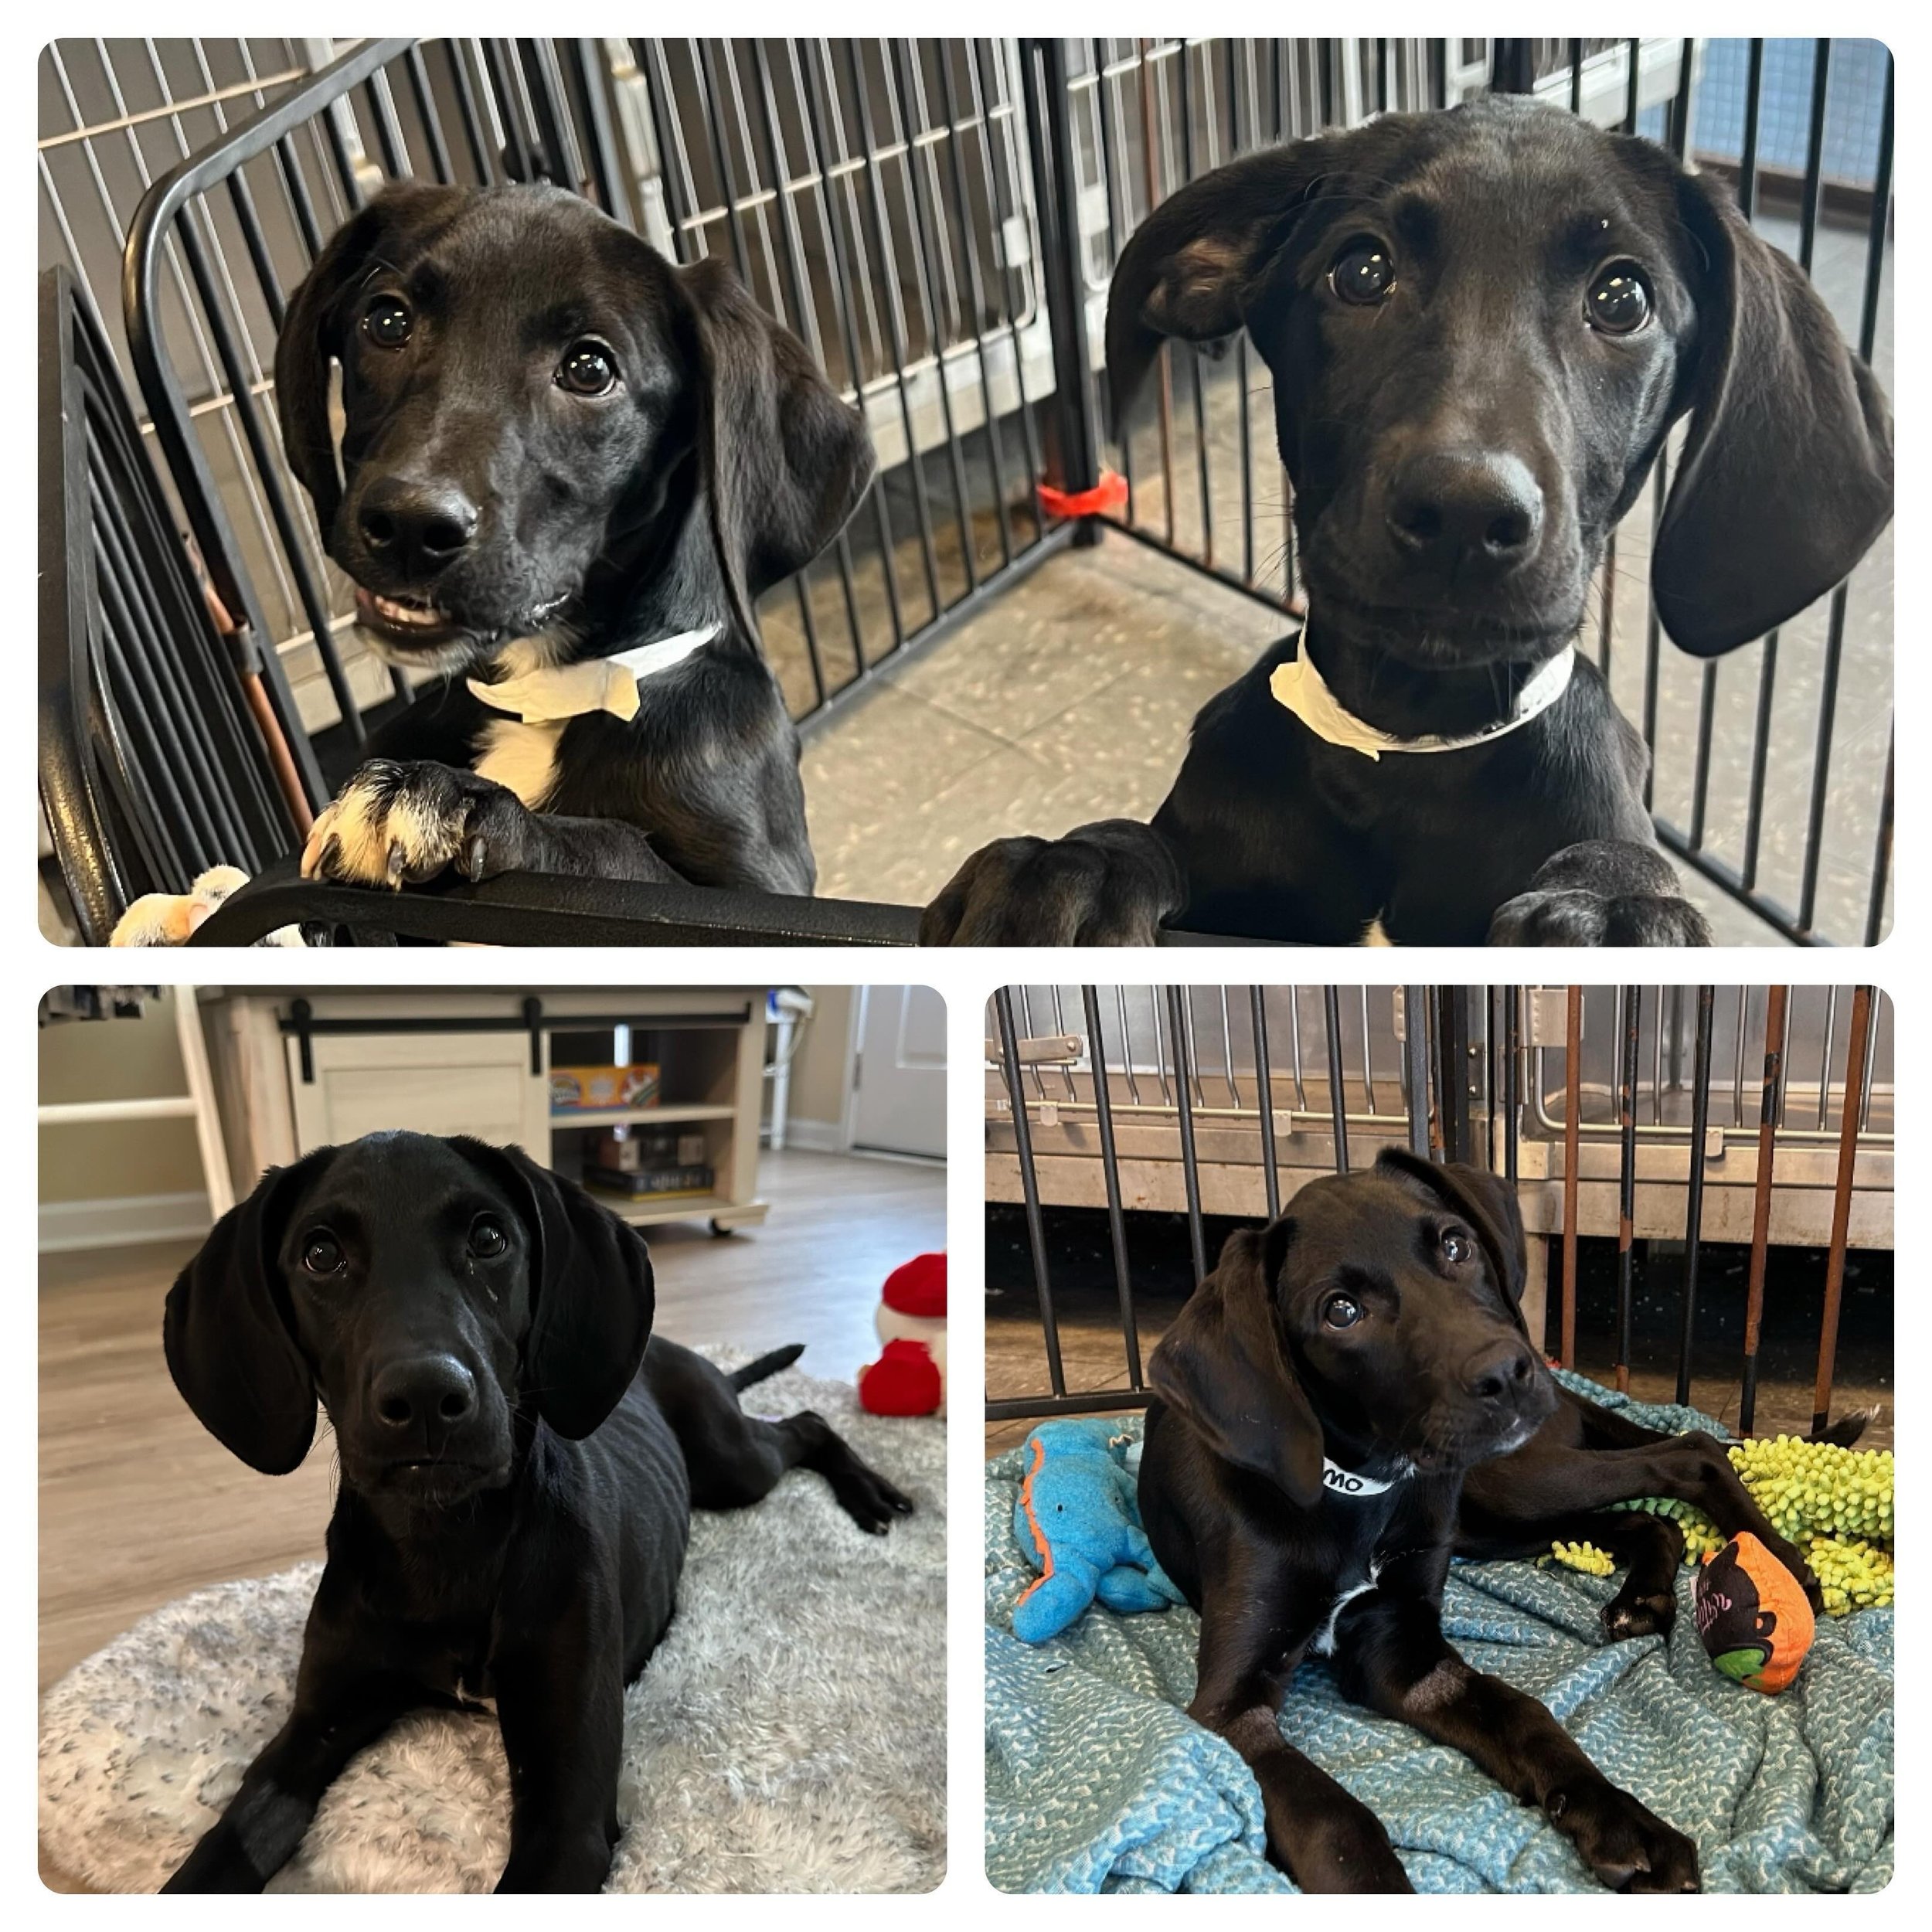 *Mother&rsquo;s Day Adoption Special!* Our paw-tiently waiting hound mix friends asked us to make it more enticing for them to find their forever homes ASAP so we felt we must oblige. Now through Saturday 5/11, adopt Luna (f), Cosmo (f), Draco (m), o